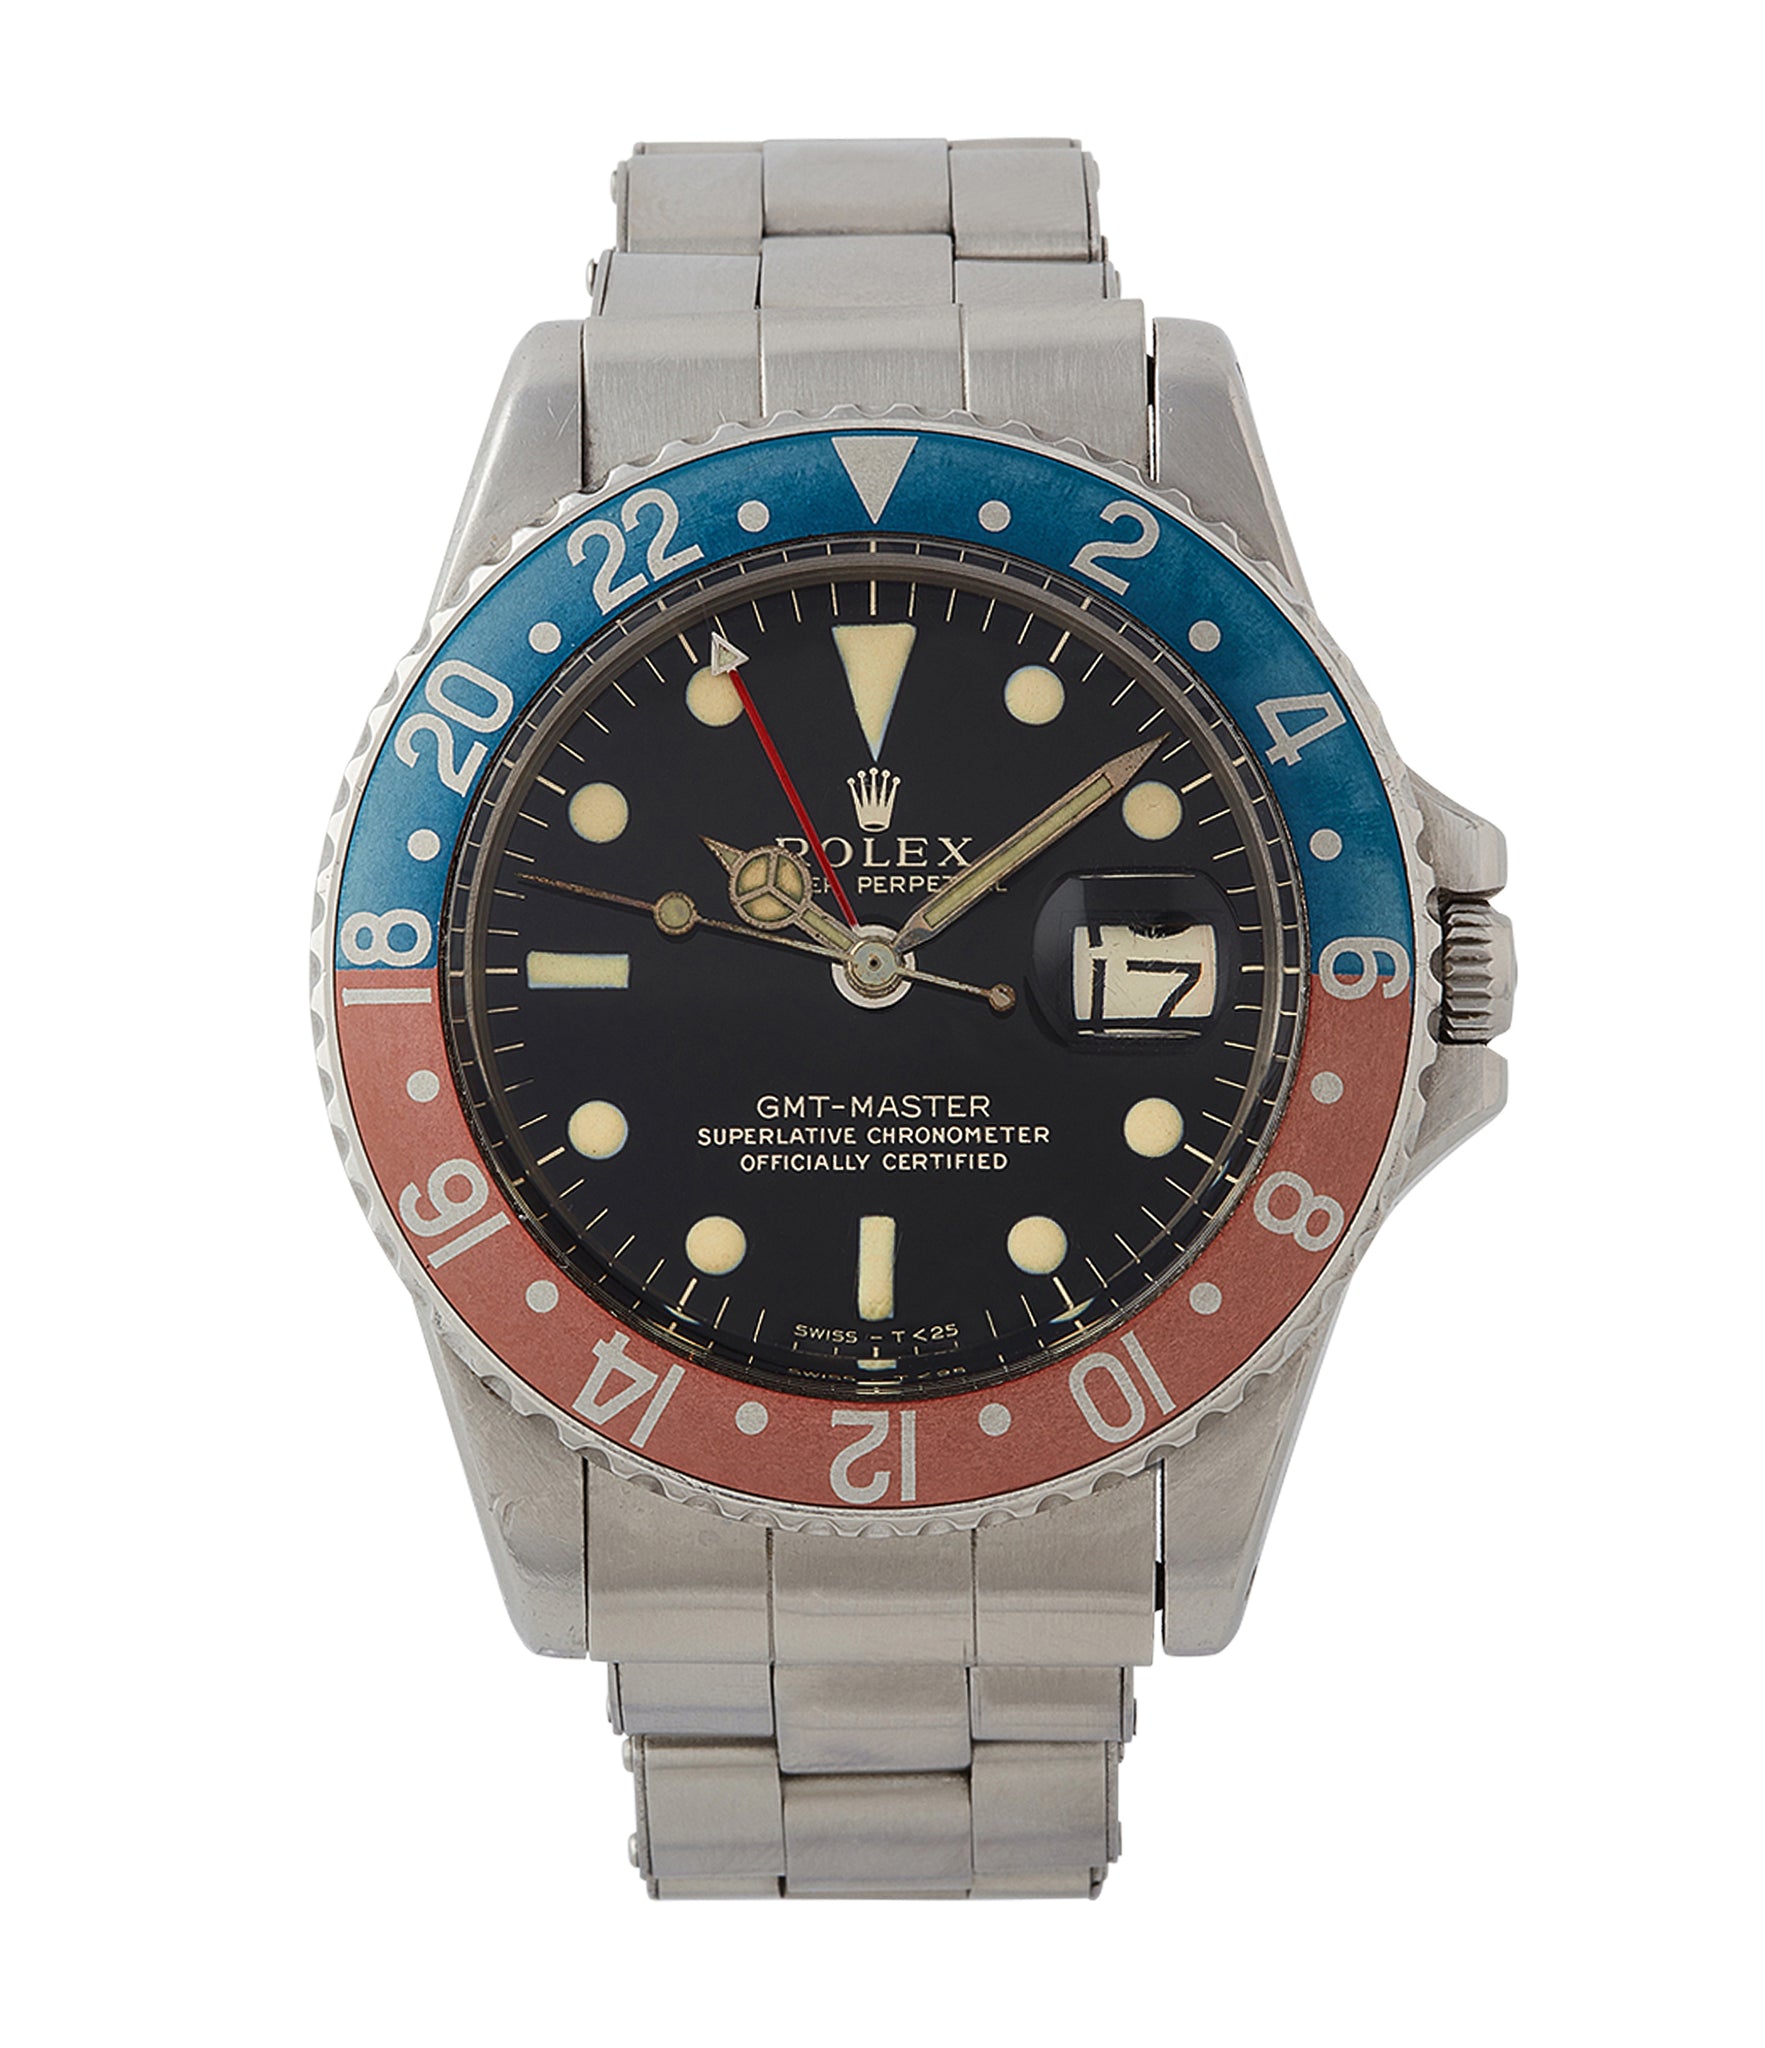 buy vintage Rolex GMT-Master 1675 Gilt dial full set vintage watch for sale online at A Collected Man London UK specialist of rare watches